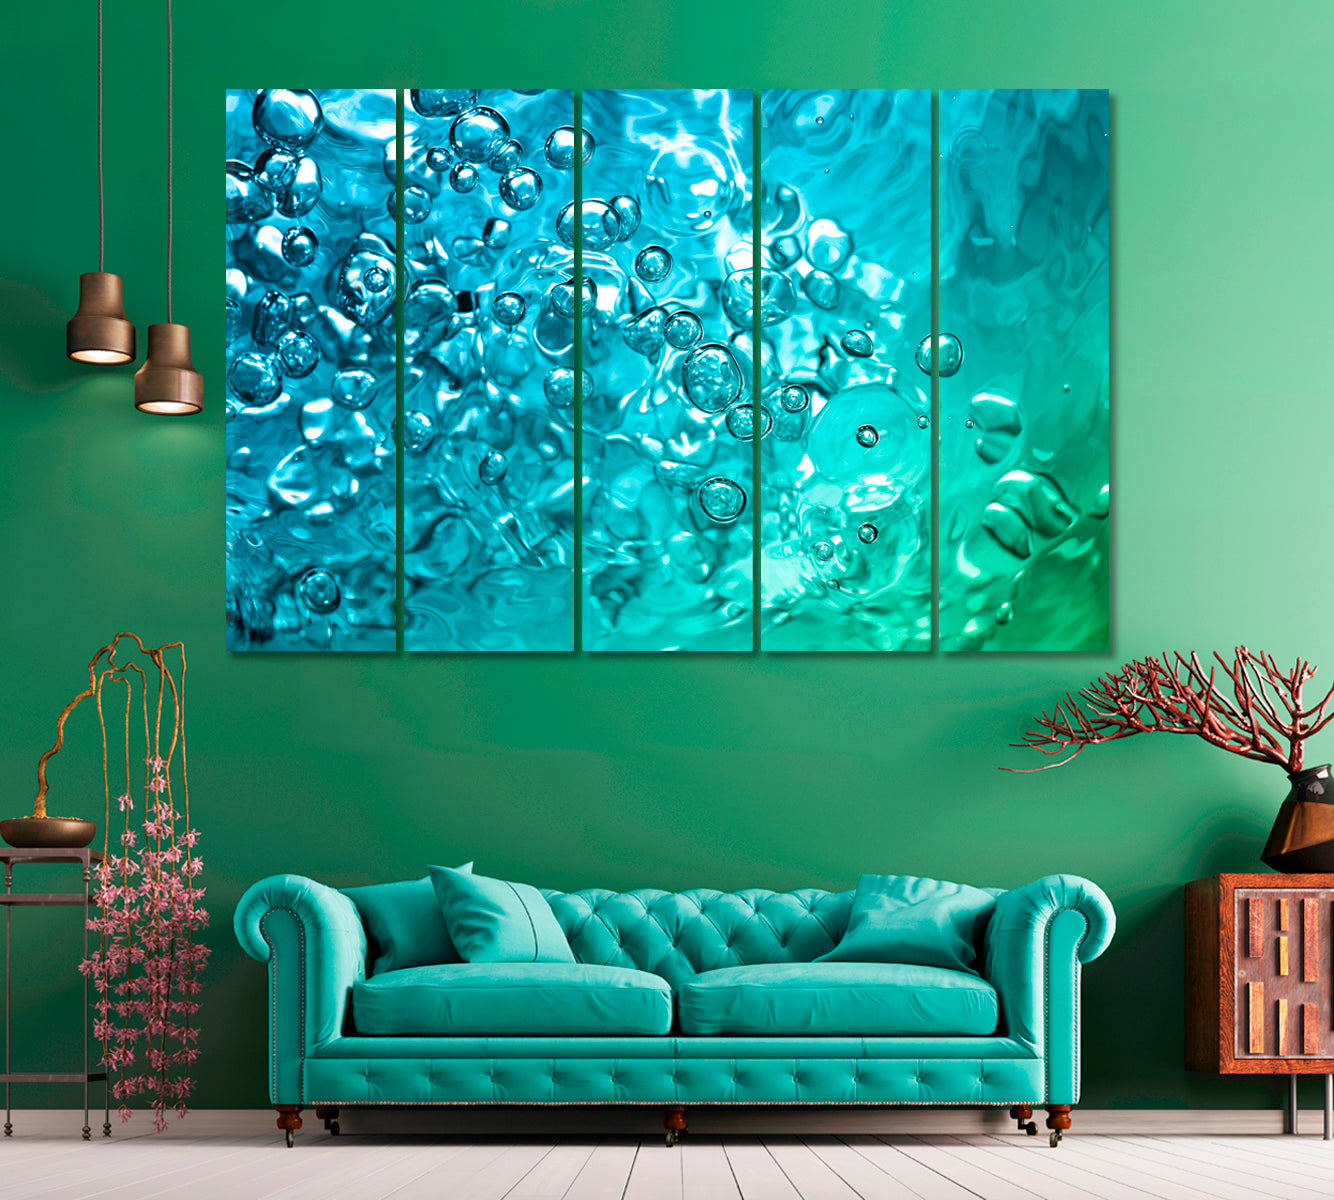 Abstract Water Bubbles Canvas Print ArtLexy 5 Panels 36"x24" inches 